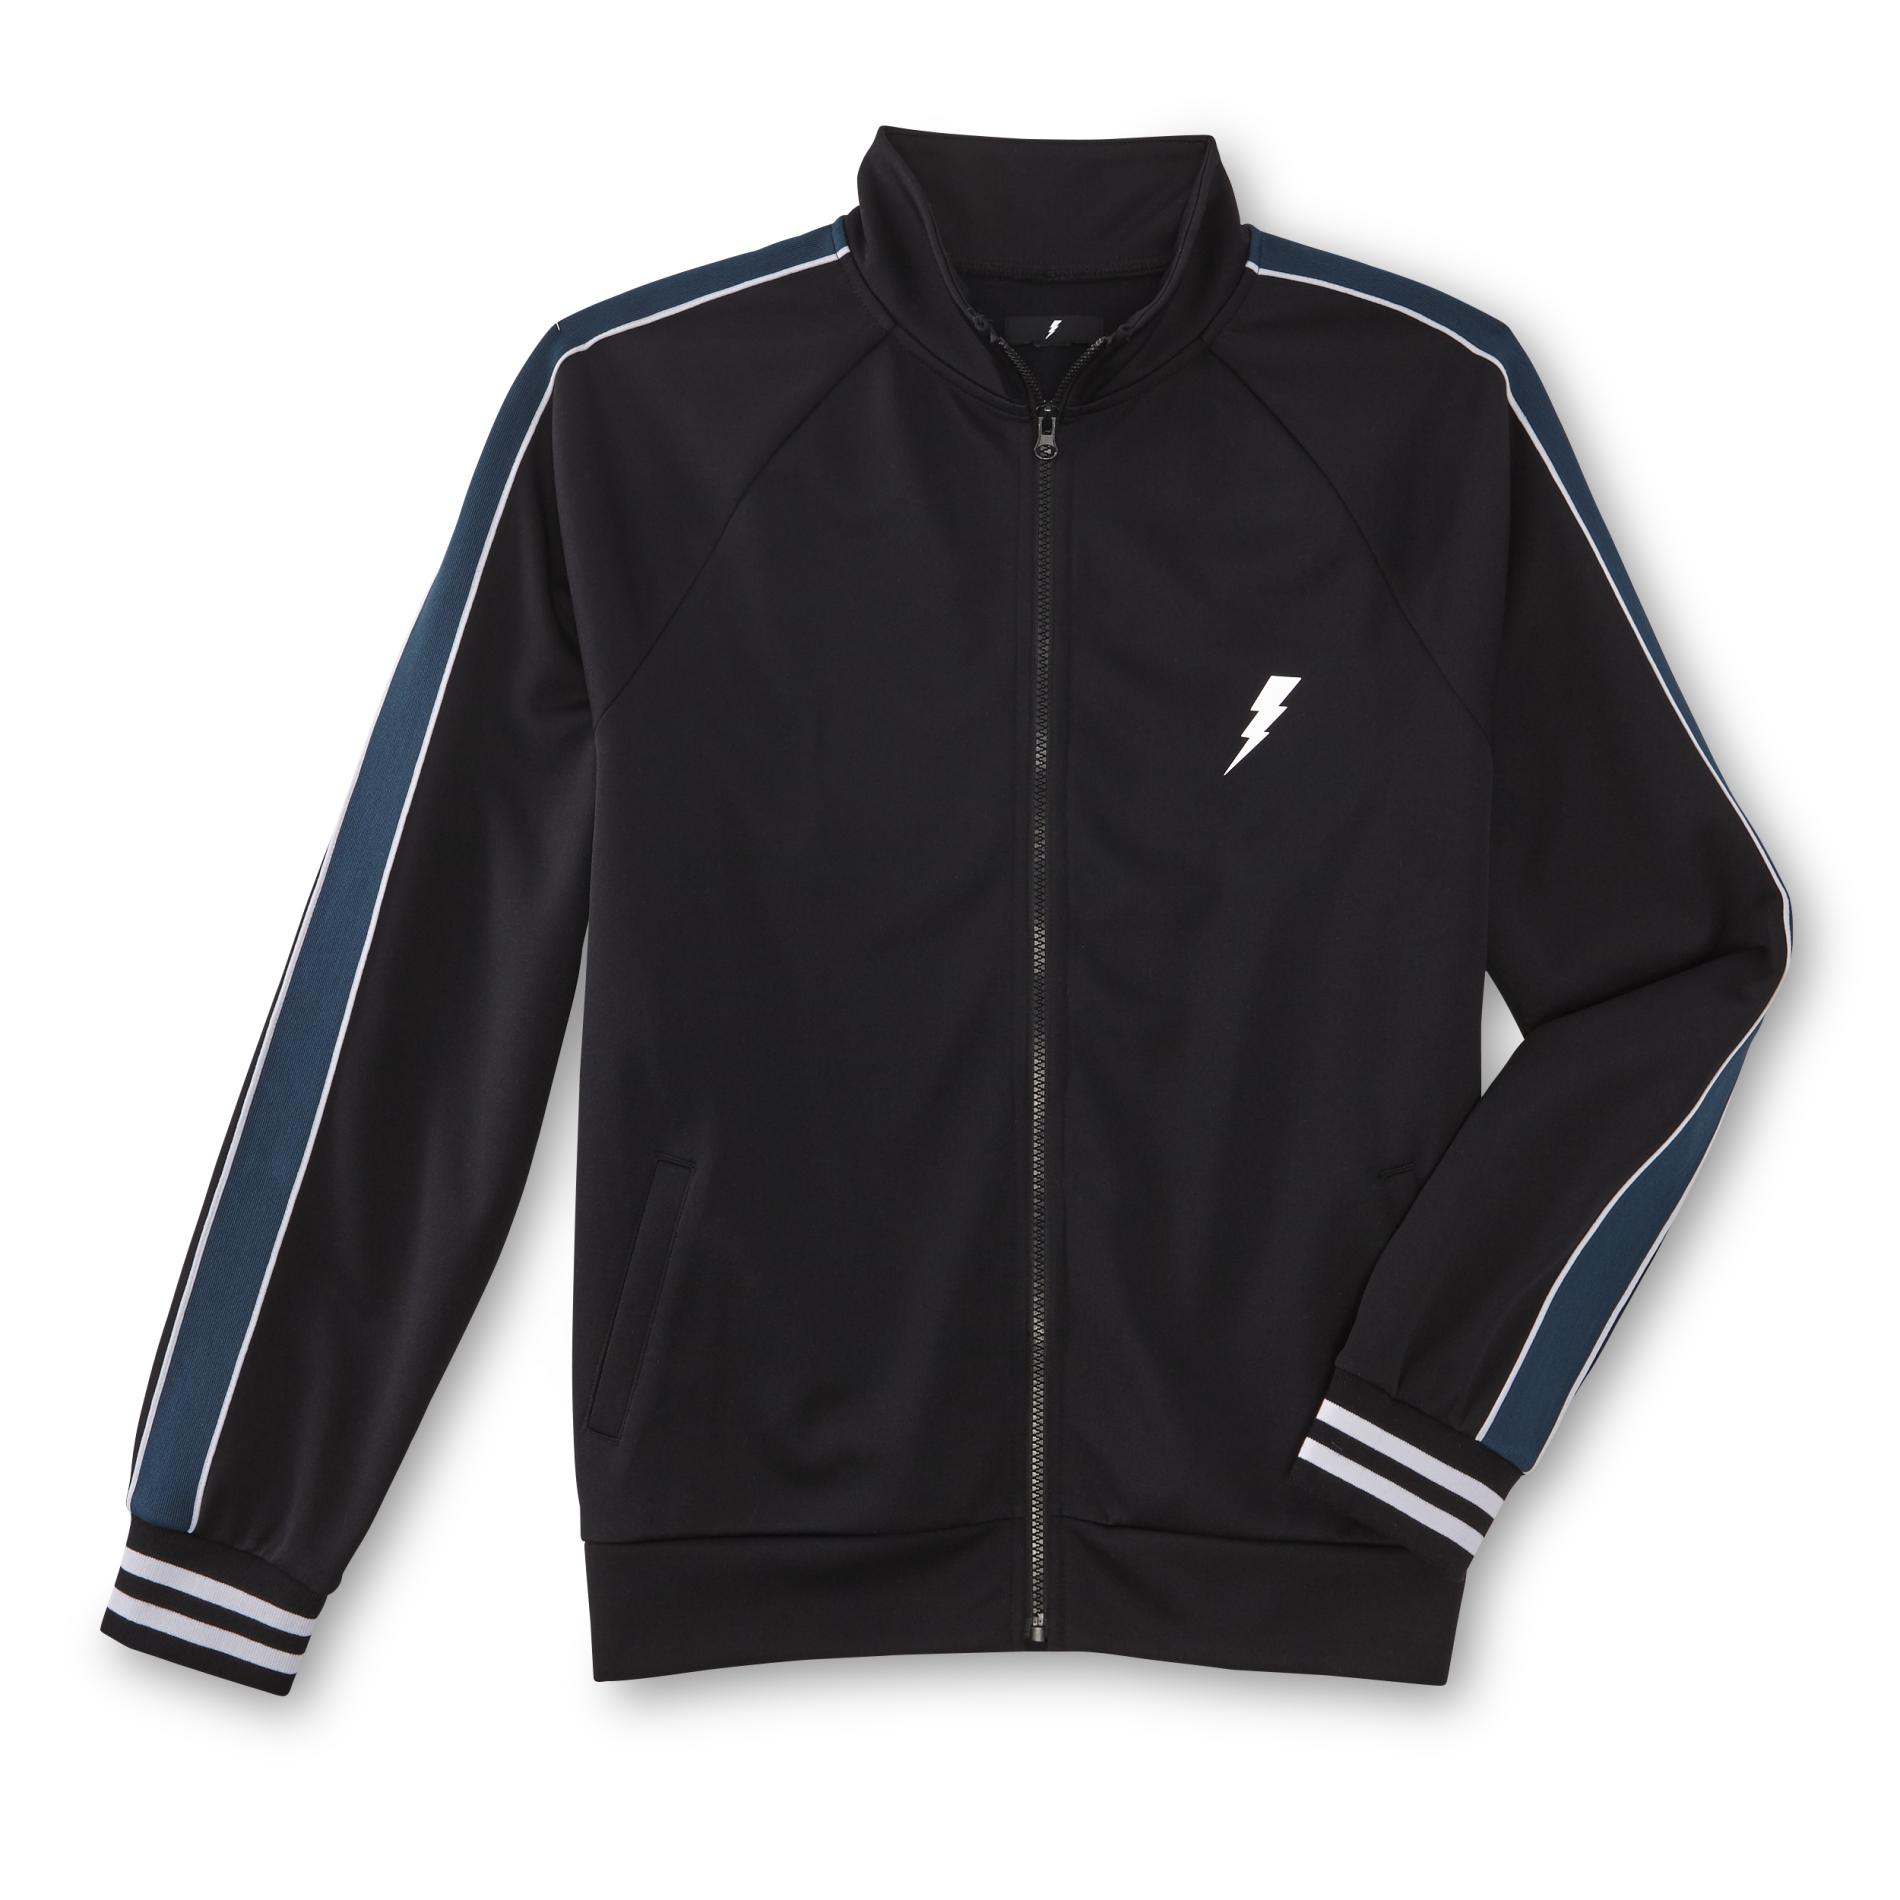 Amplify Young Men's Track Jacket